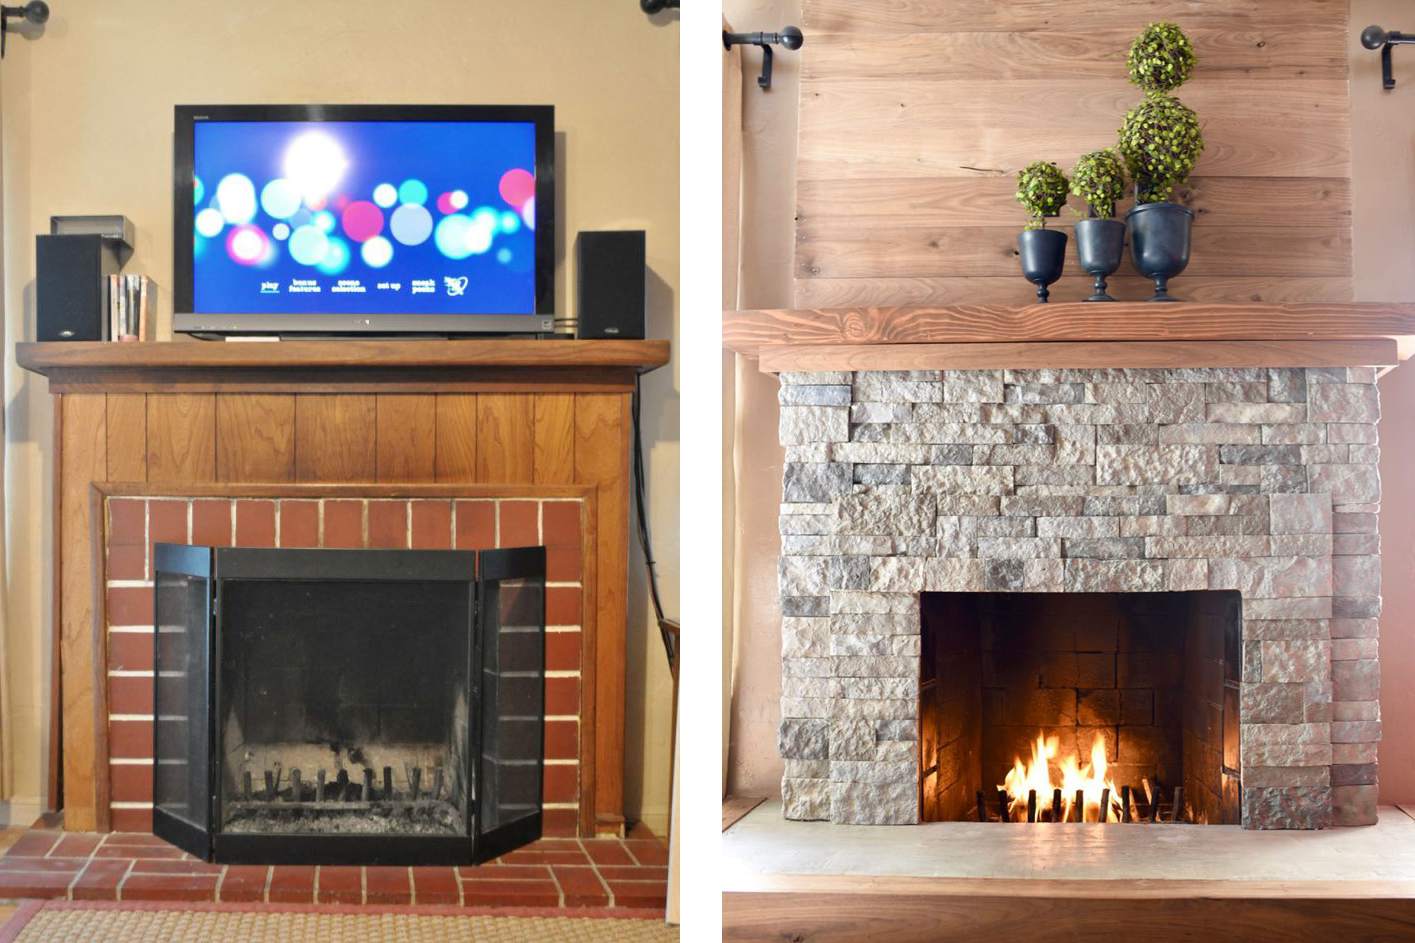 Tv Over Wood Burning Fireplace Lovely 25 Beautifully Tiled Fireplaces